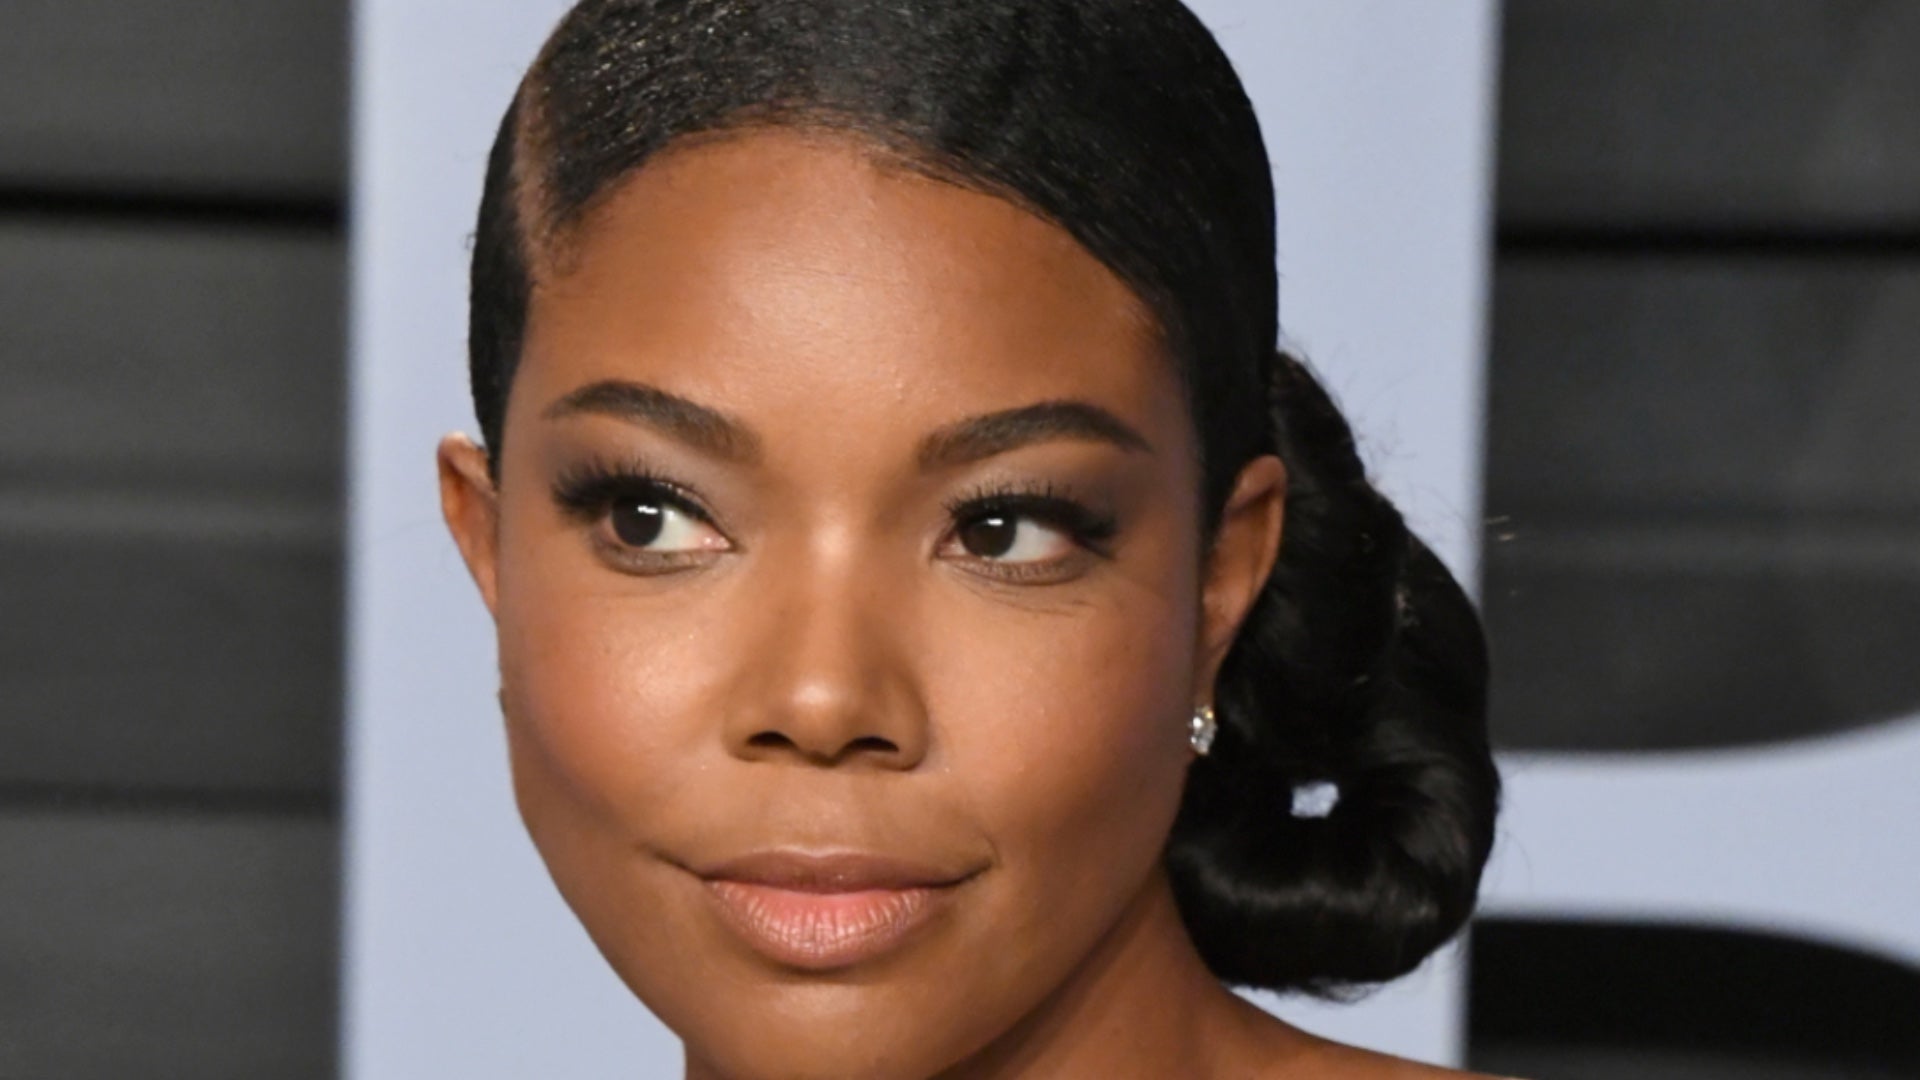 Gabrielle Union Just Gave Us A Look At The Season's Coolest Haircut